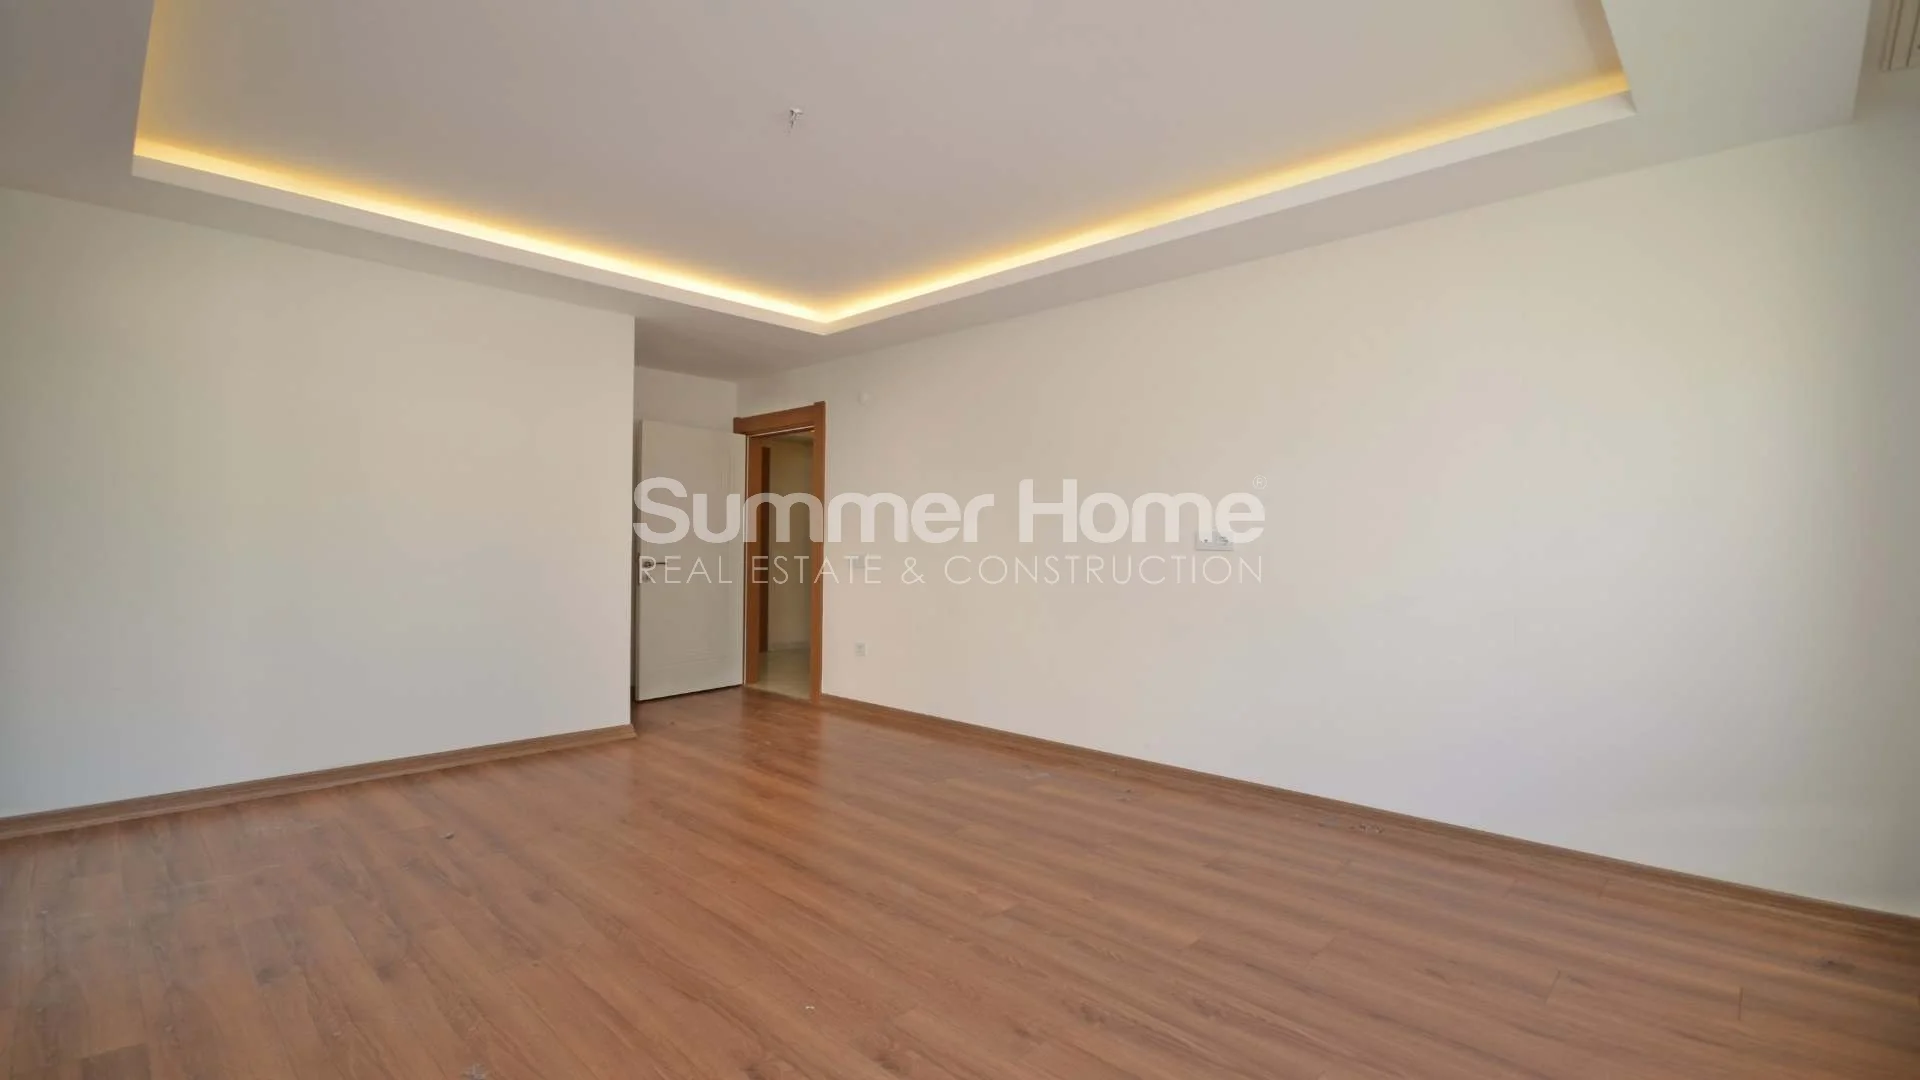 For sale Apartment Alanya Hasbahce Interior - 21